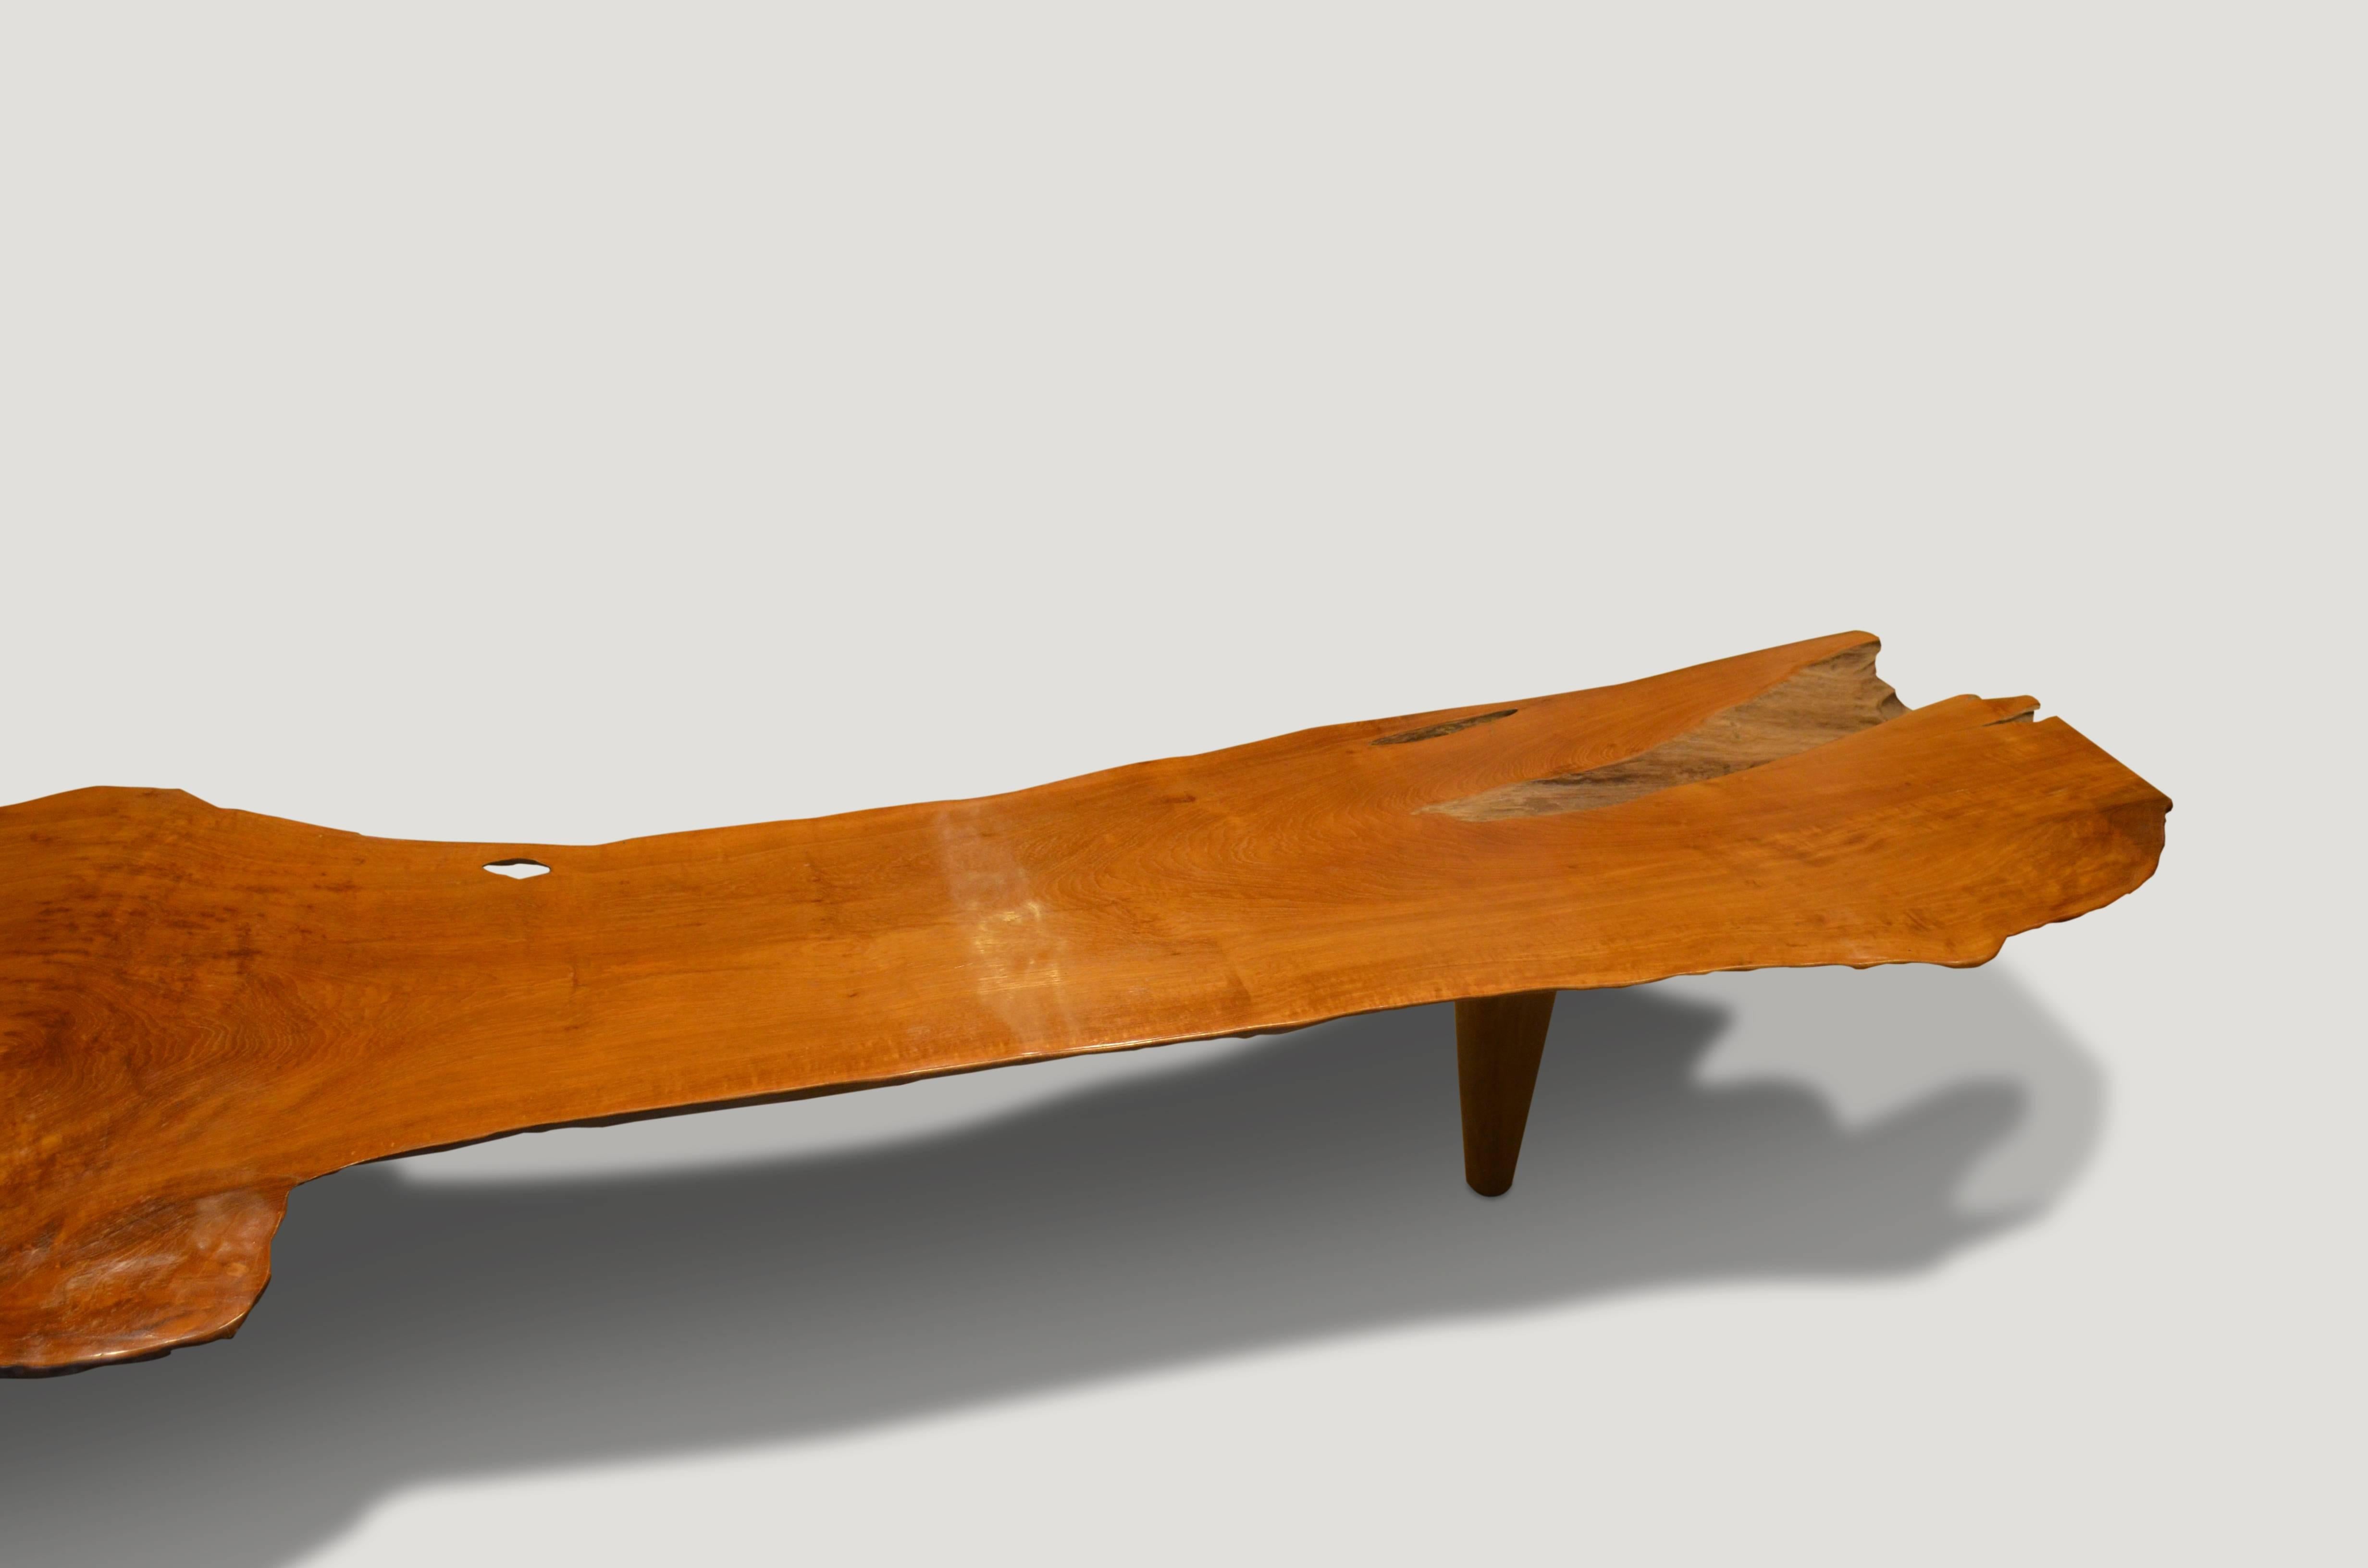 Impressive 5” single teak wood slab top coffee table of bench. We have added midcentury style legs to this stunning organic shape and polished the top to enhance the grain in the reclaimed teak wood, whilst leaving sections of the sides raw for an